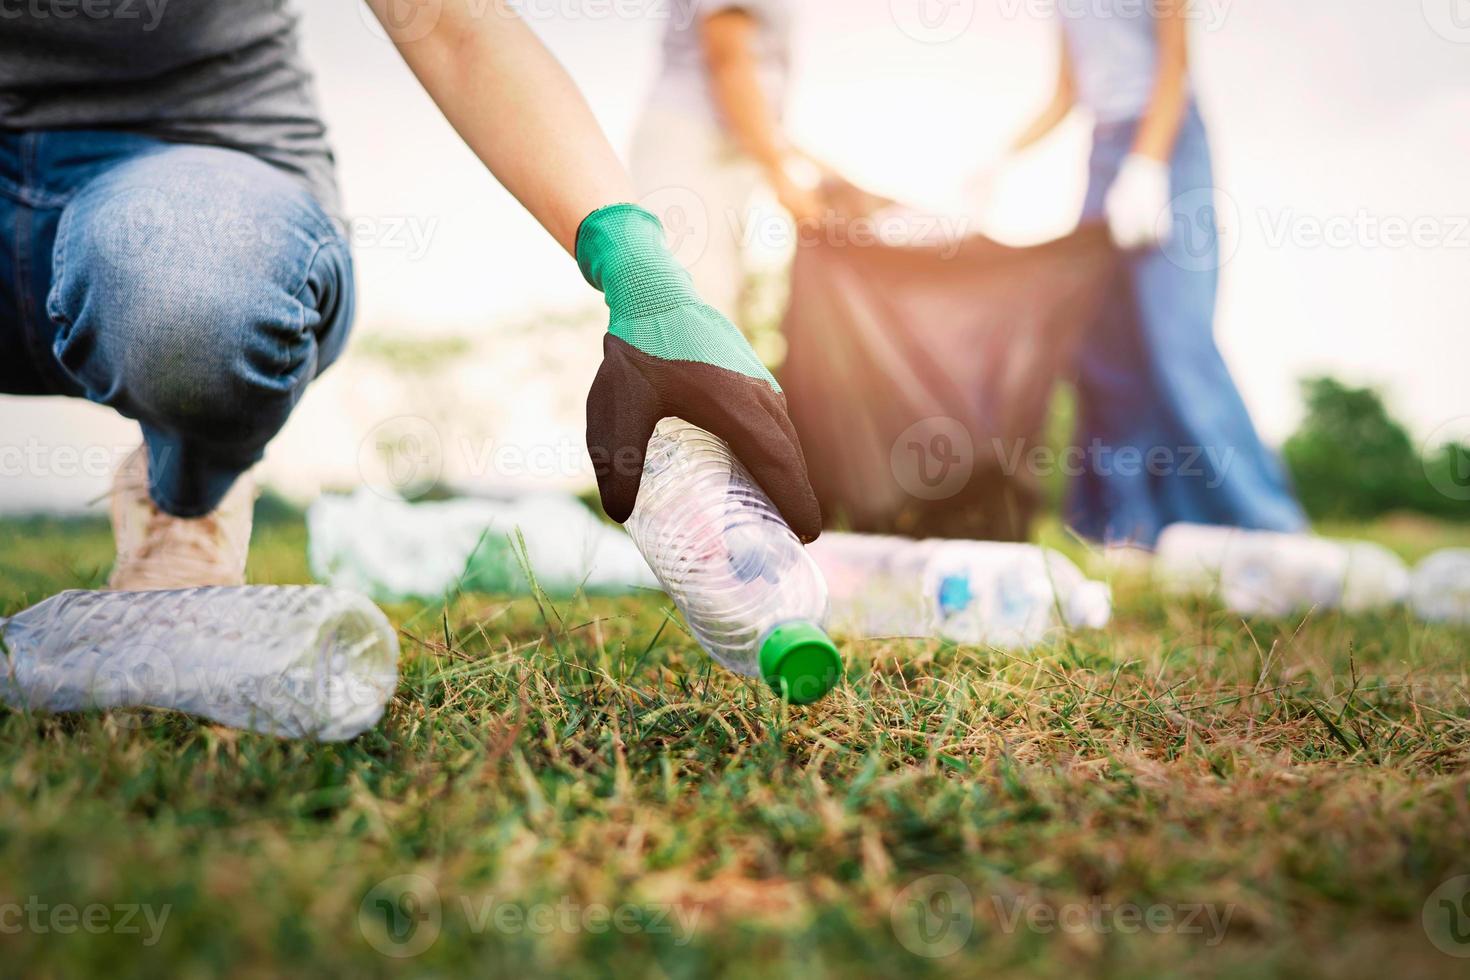 woman hand picking up garbage plastic bottle for cleaning at park photo